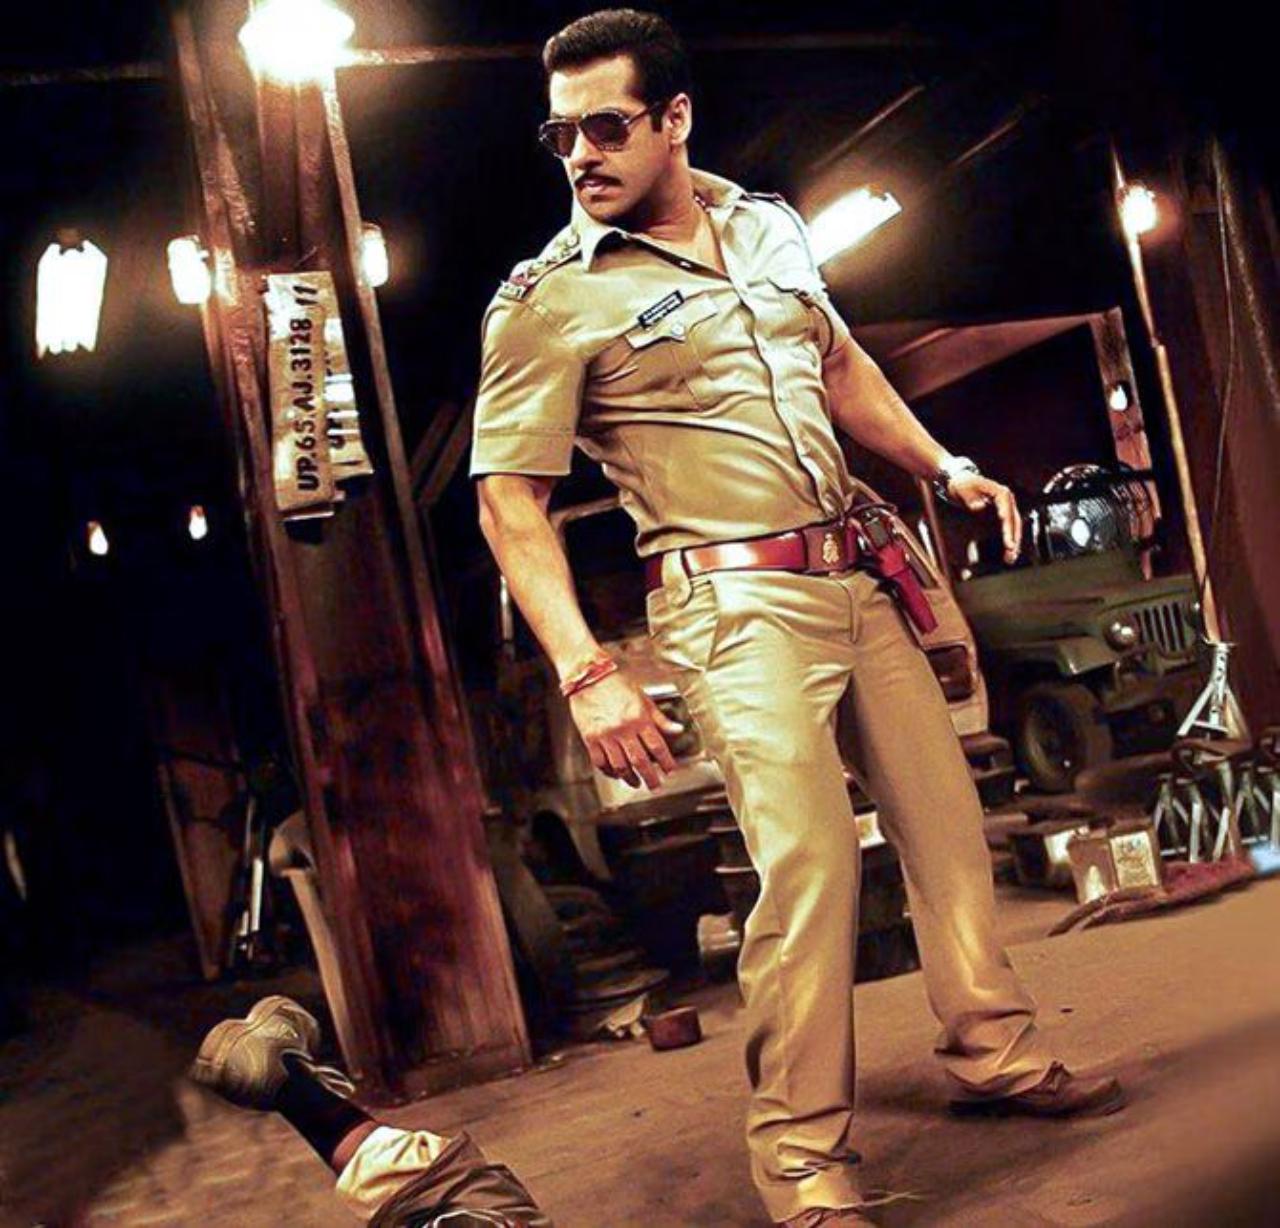 Salman Khan in Dabangg
While Salman Khan had played a police officer on screen earlier, it was only with Dabangg that his cop-avatar became a brand in Bollywood. Khakee uniform with a belt and his signature sunglasses, became a fashion statement across the nation and continues to make his one of the favourite reel police officers of India